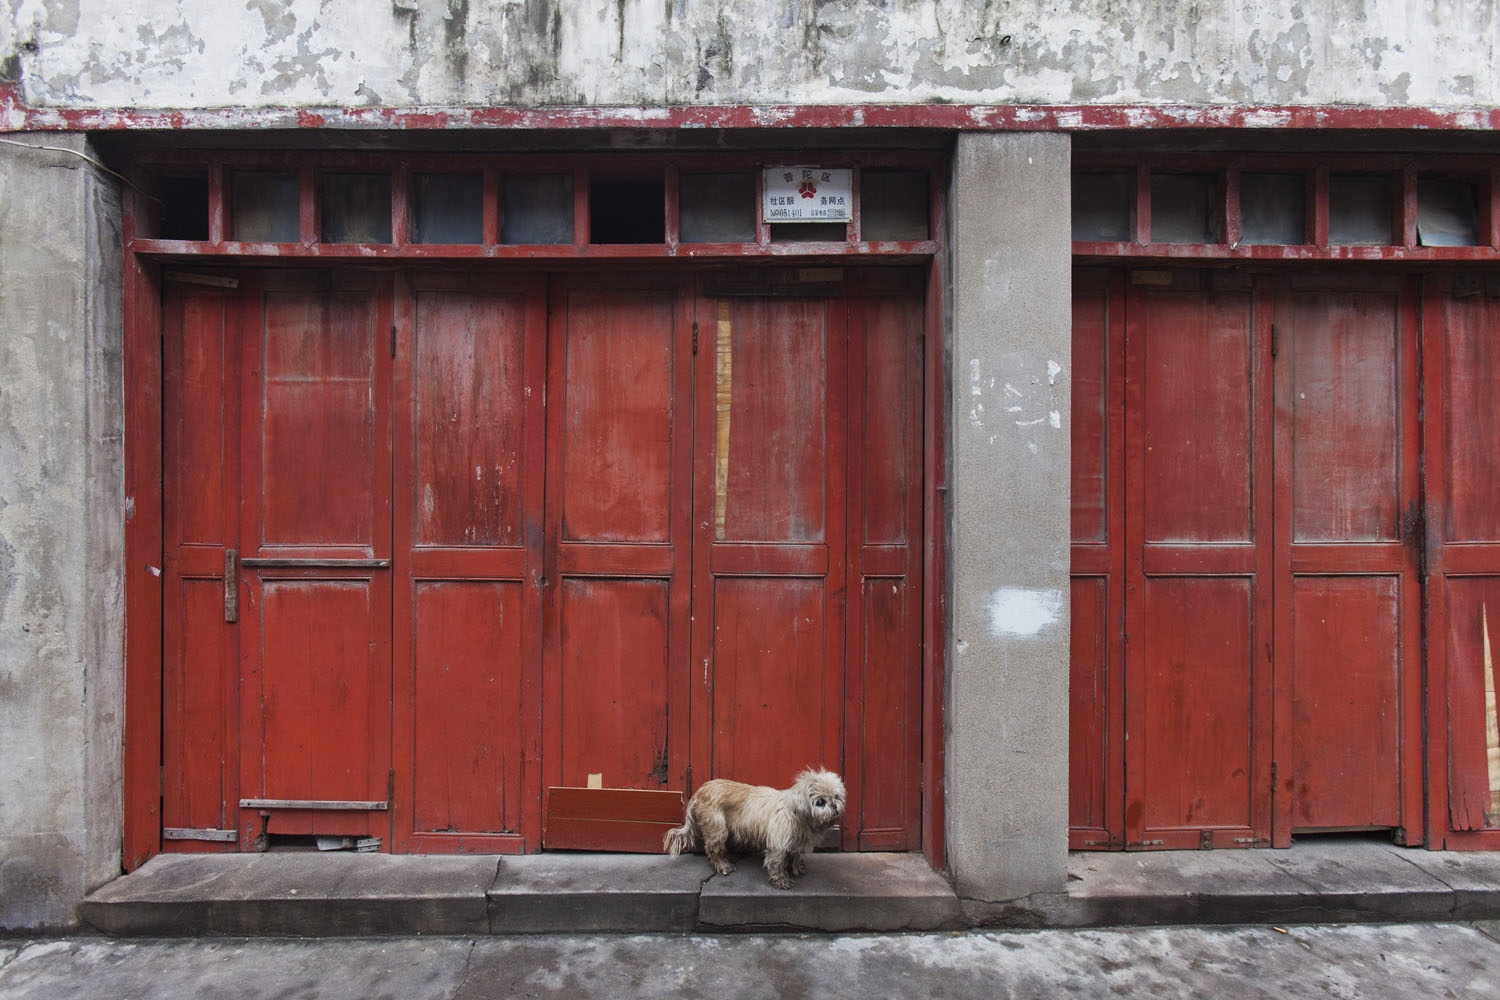 A dog stands outside of a small convenience store. Guangfu Road. Shanghai, China. 2015.